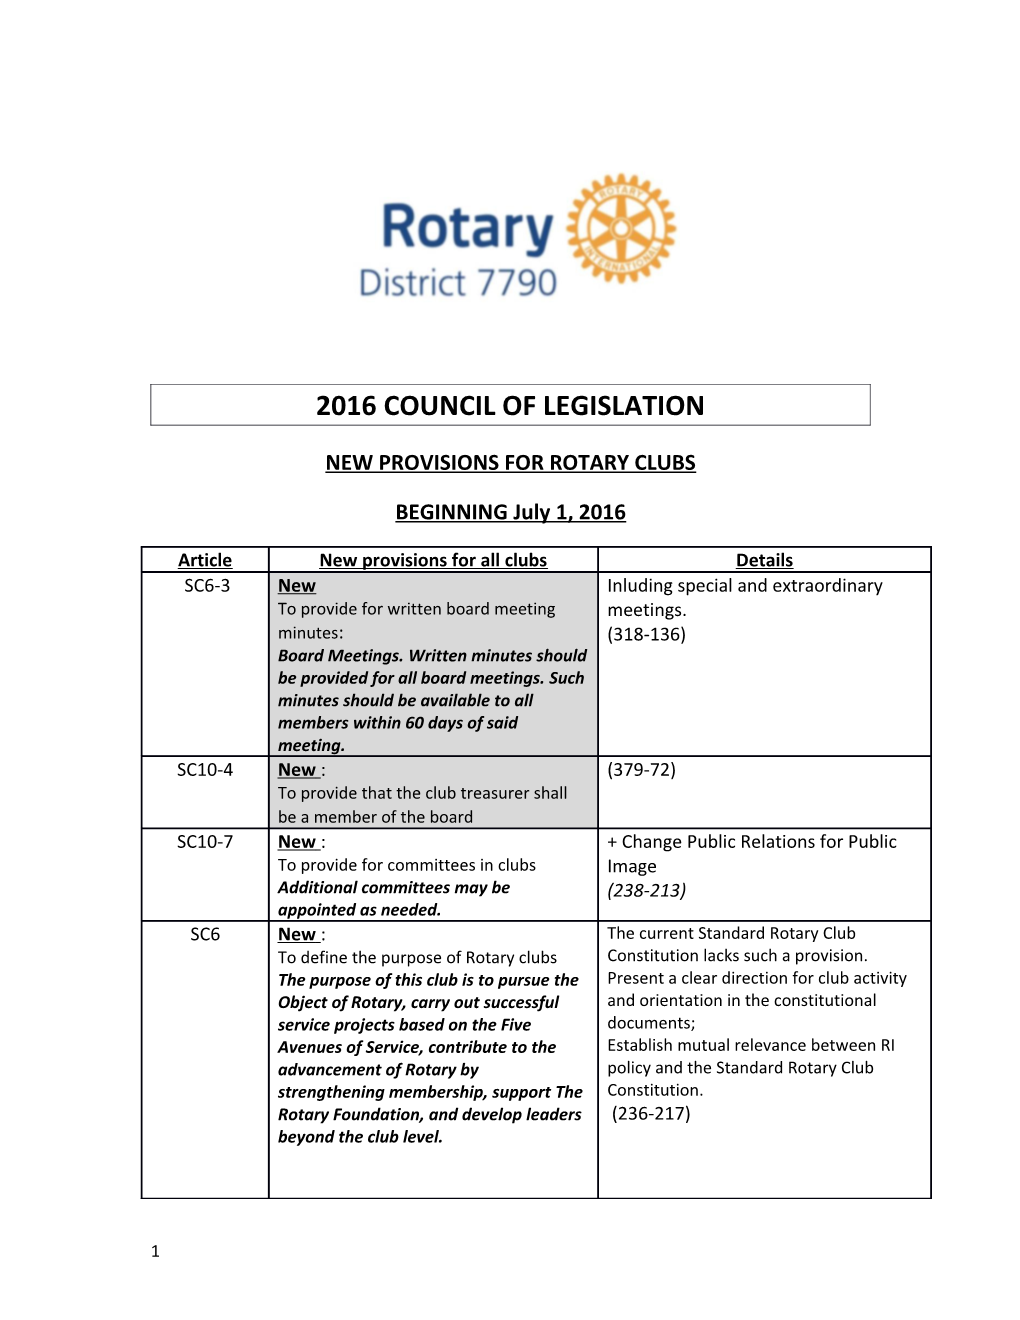 New Provisions for Rotary Clubs